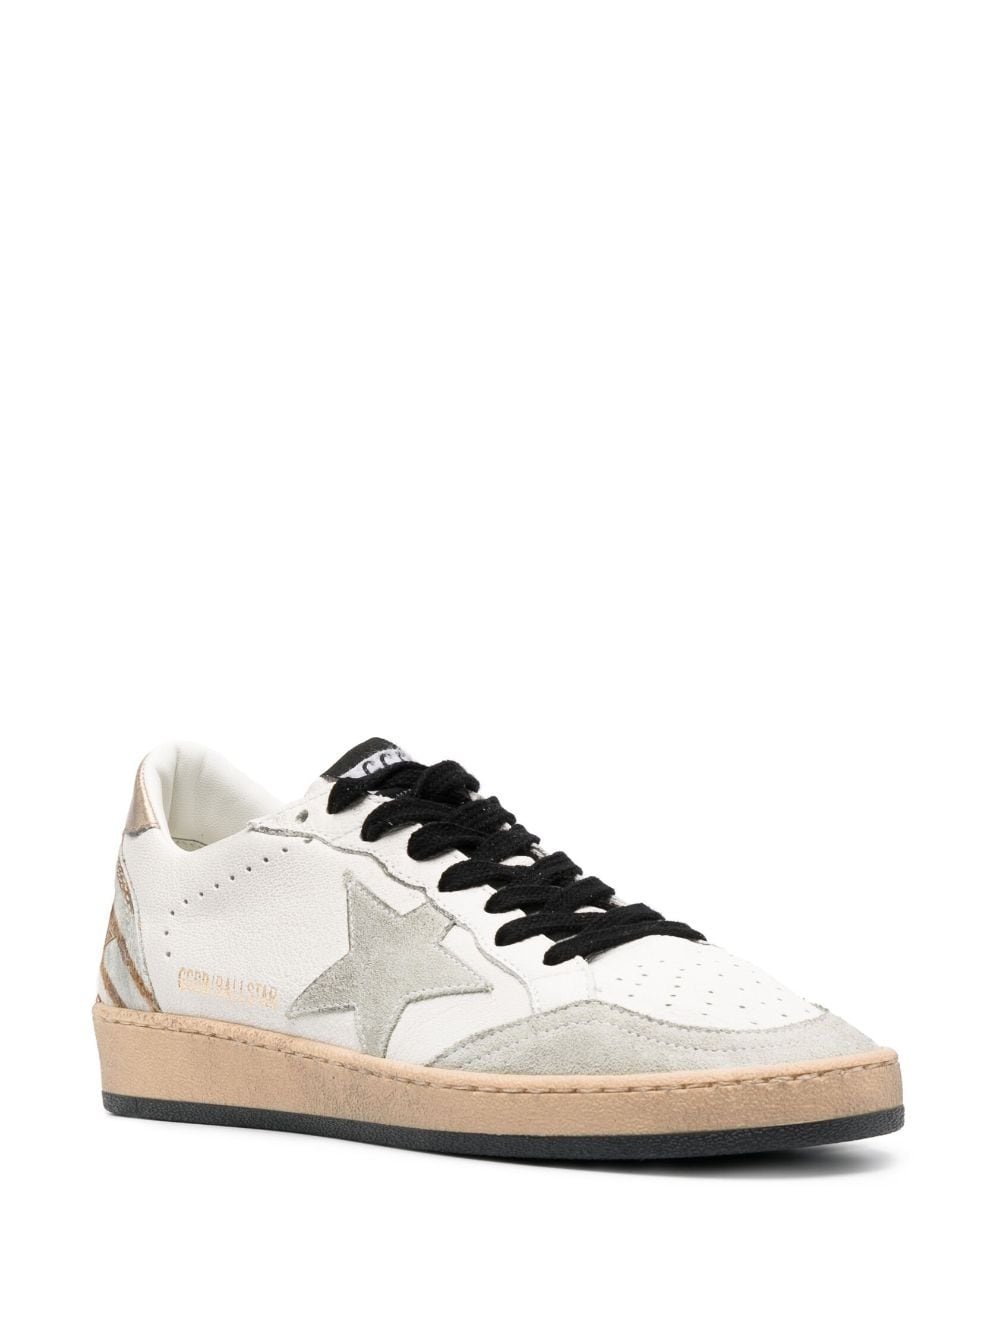 Ball Star leather sneakers - 2